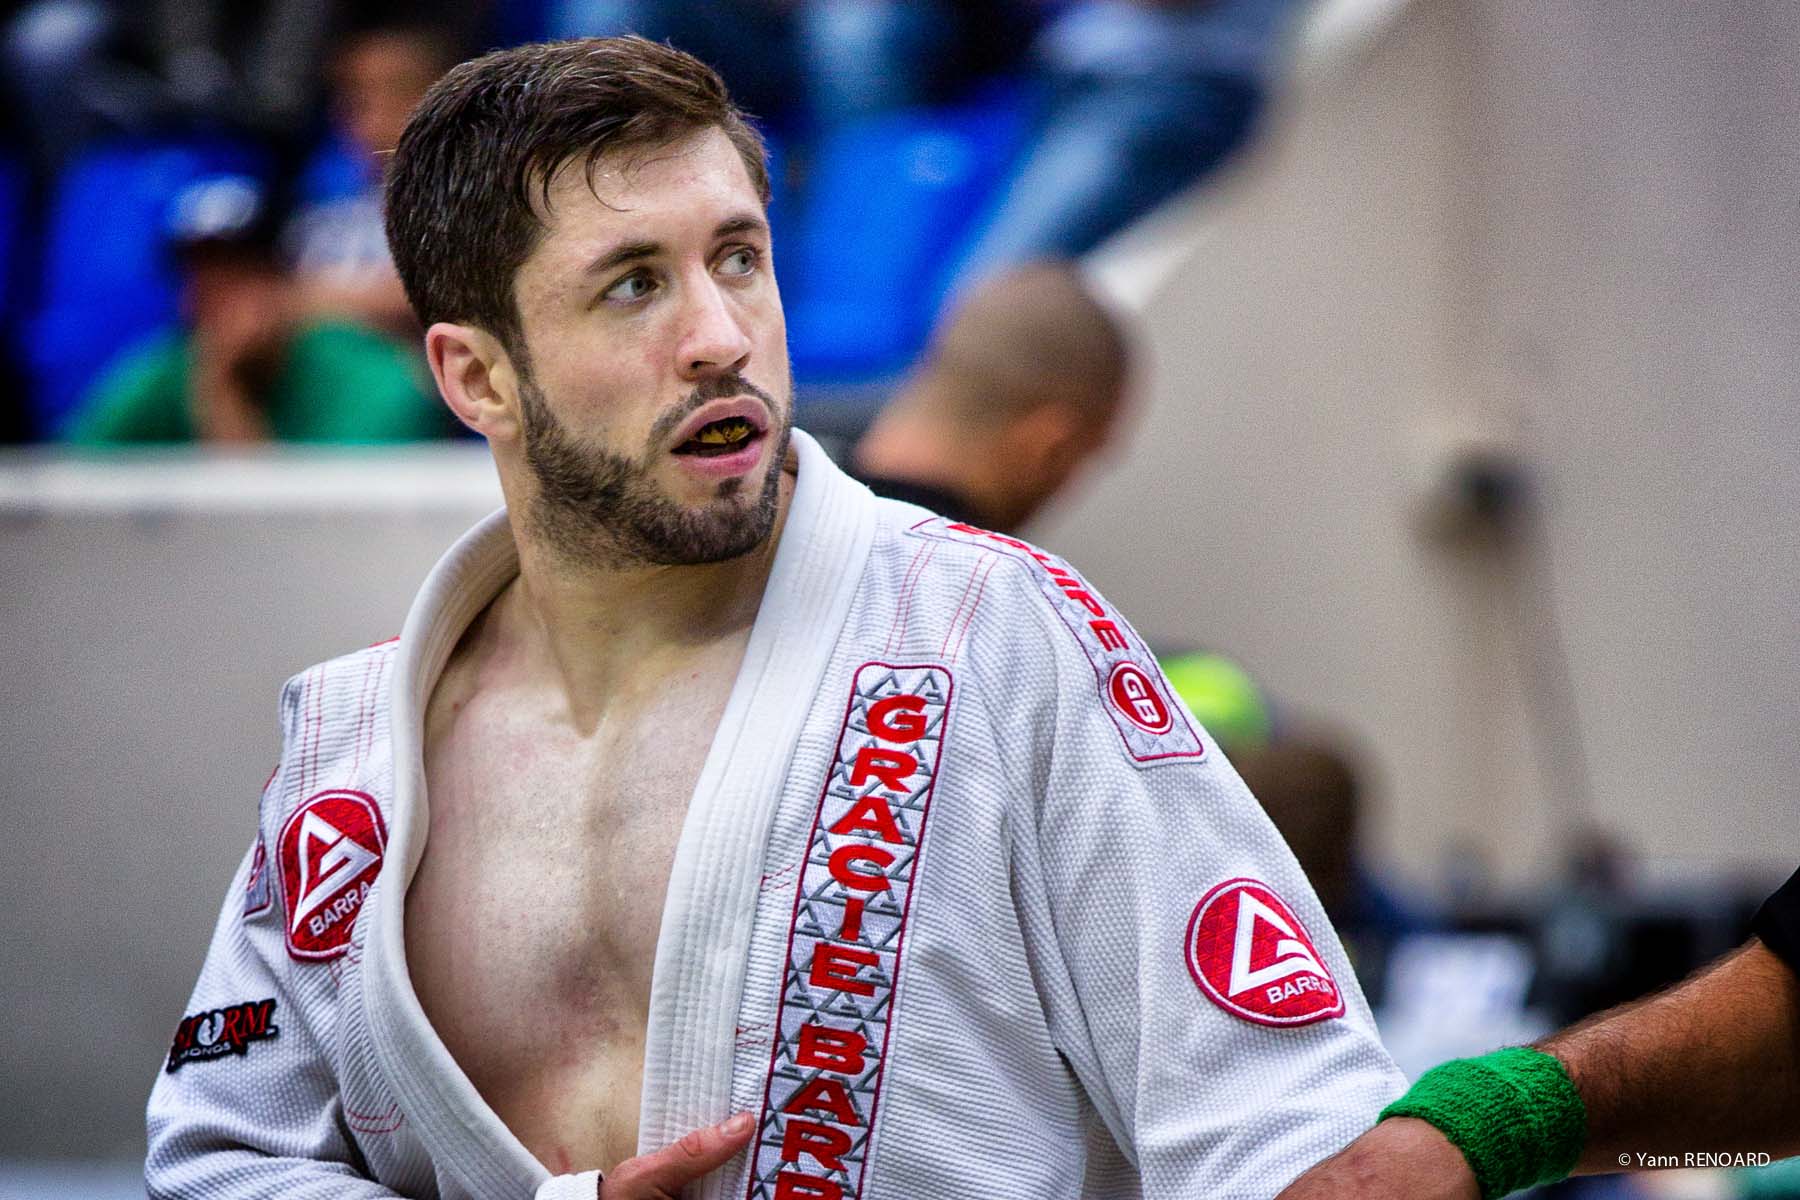 Julien ‘Cafetao’ Cazier’, Head Instructor of Gracie Barra Paris: ‘We Are a Family’